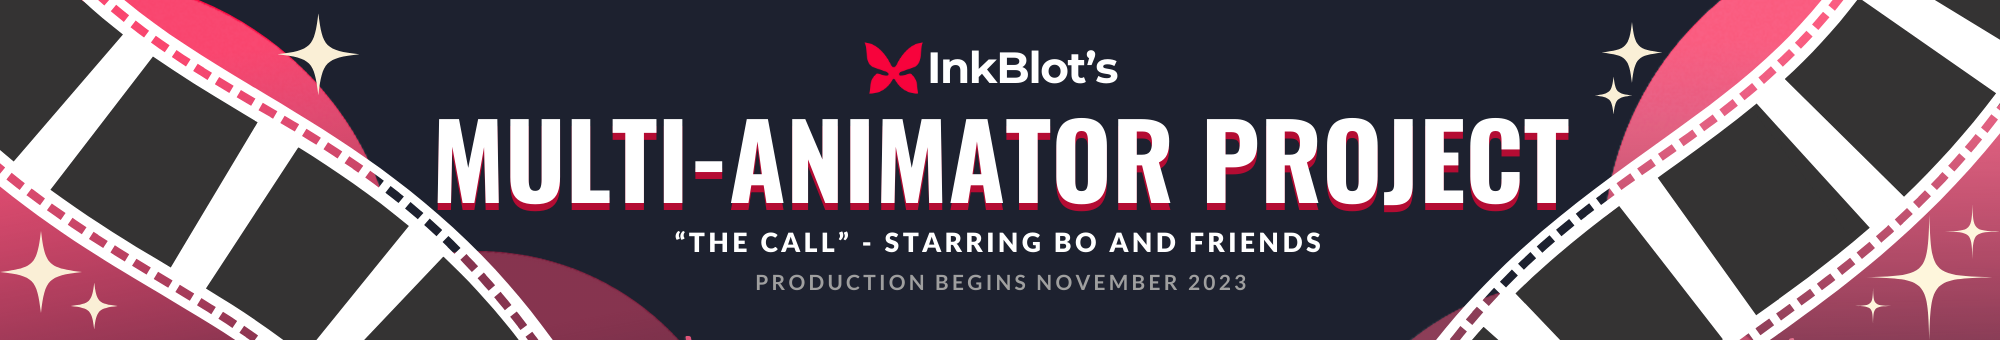 Red circles with white sparkles sit on the corners of the image. Across them runs a black and white film strip. In the center is text that reads "InkBlot's Multi-Animator Project. 'The Call' - Starring Bo and Friends. Production Begins November 2023."